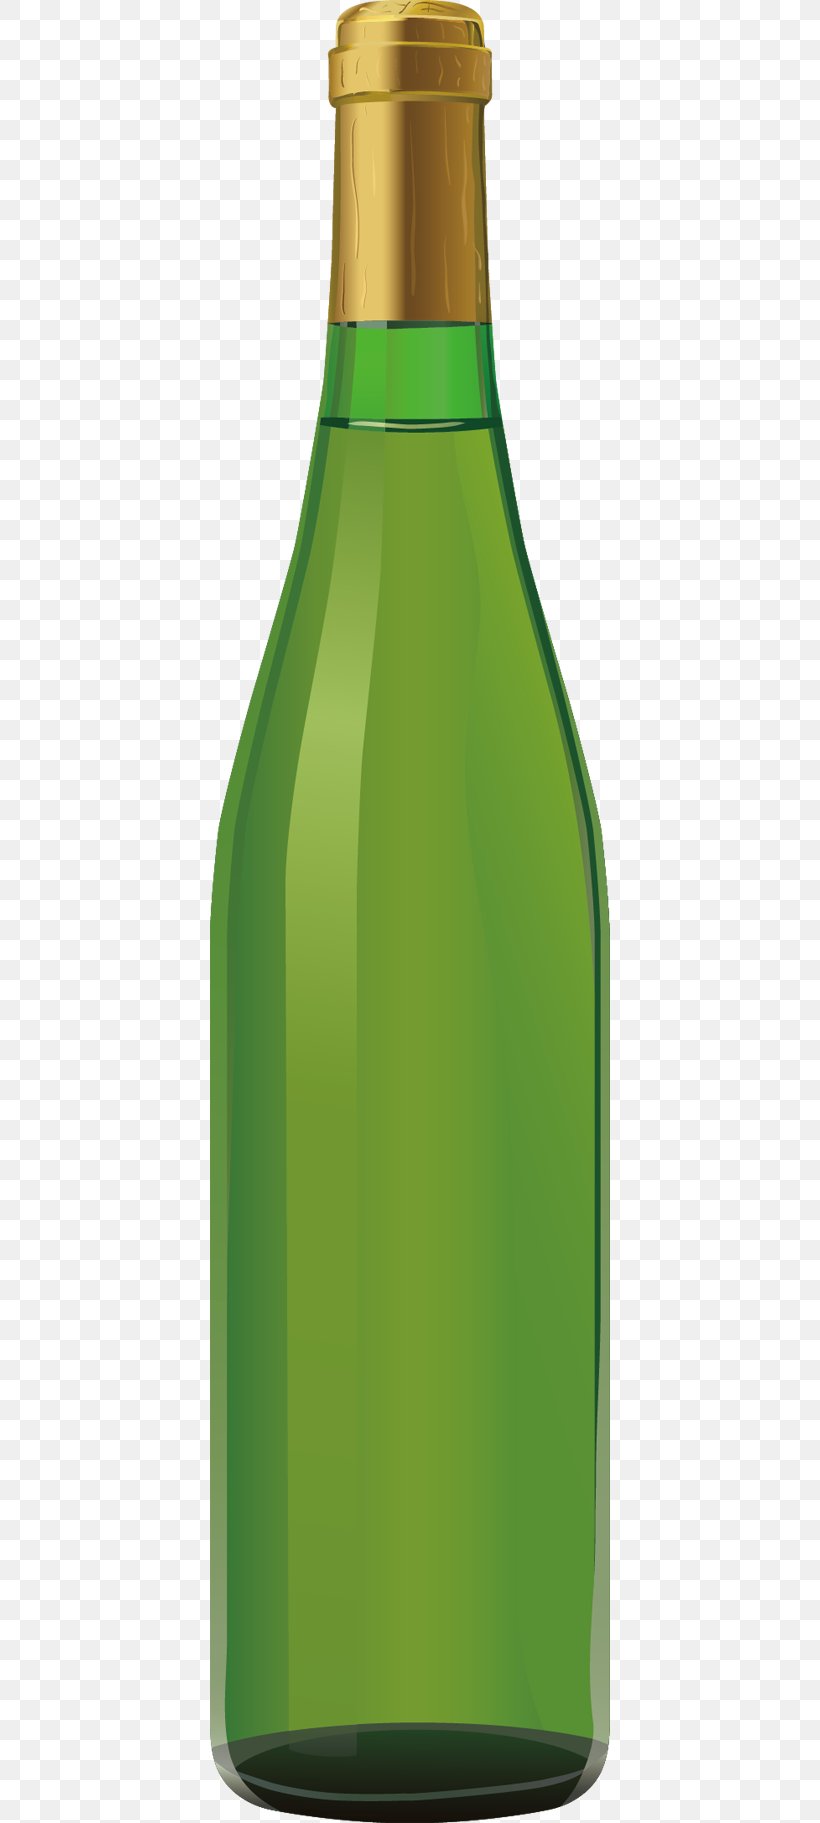 Beer Bottle Champagne Glass Bottle, PNG, 400x1823px, Beer, Alcoholic Beverage, Beer Bottle, Bottle, Bottle Cap Download Free